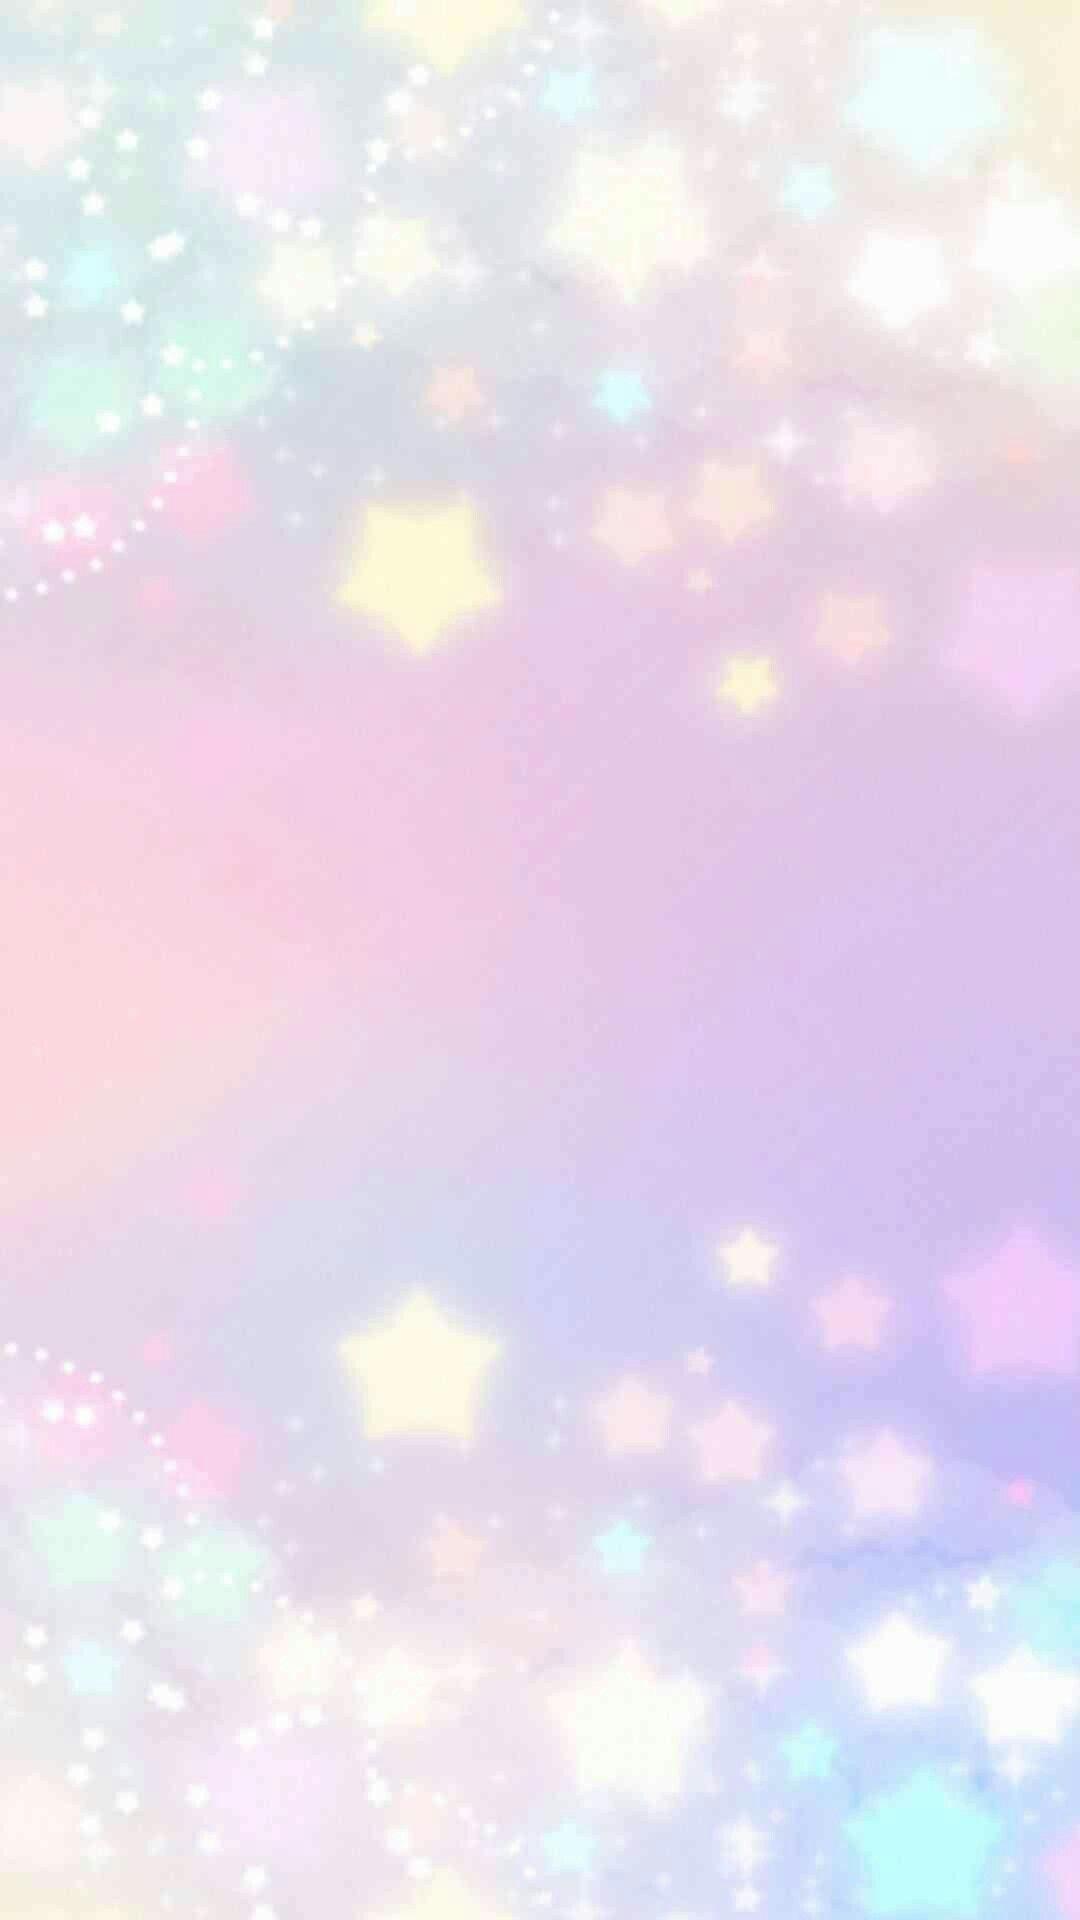 Aesthetic background for phone with pastel colors - Pastel rainbow